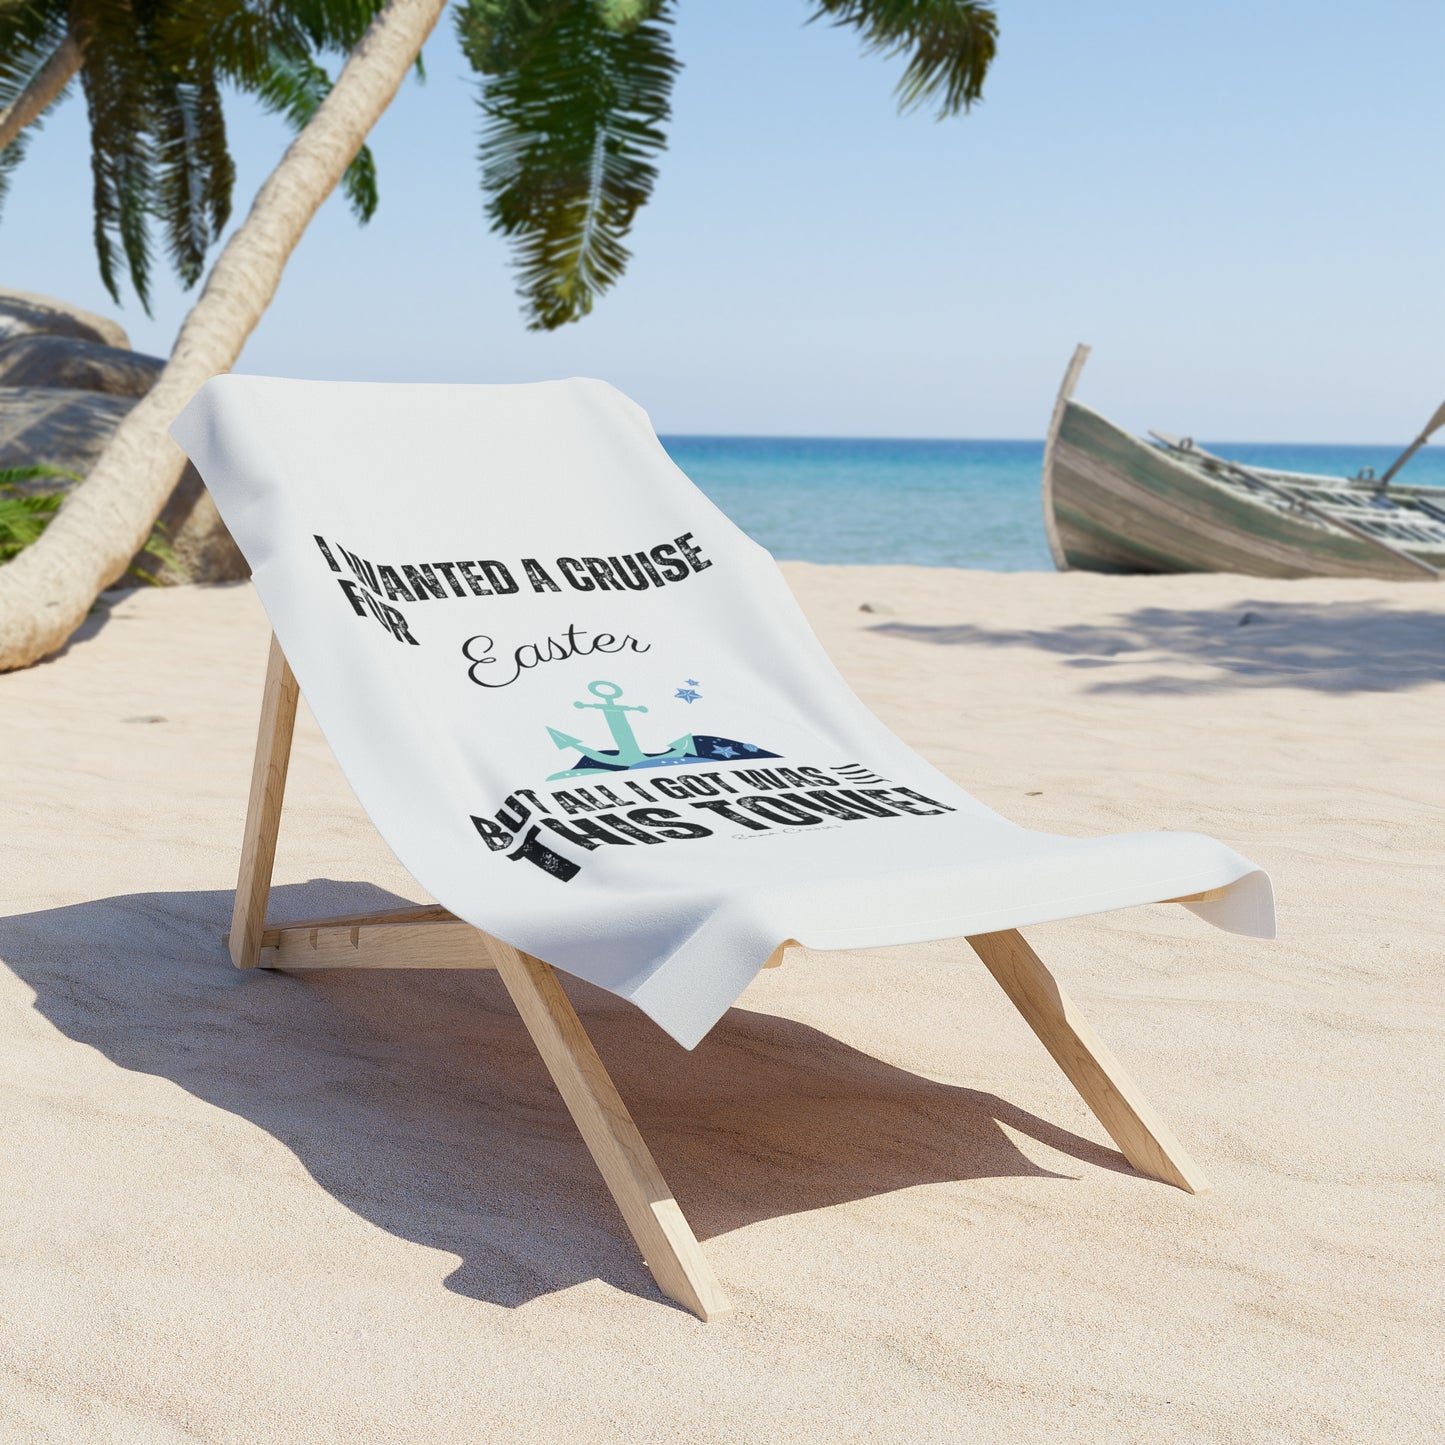 I Wanted a Cruise for Easter - Beach Towel